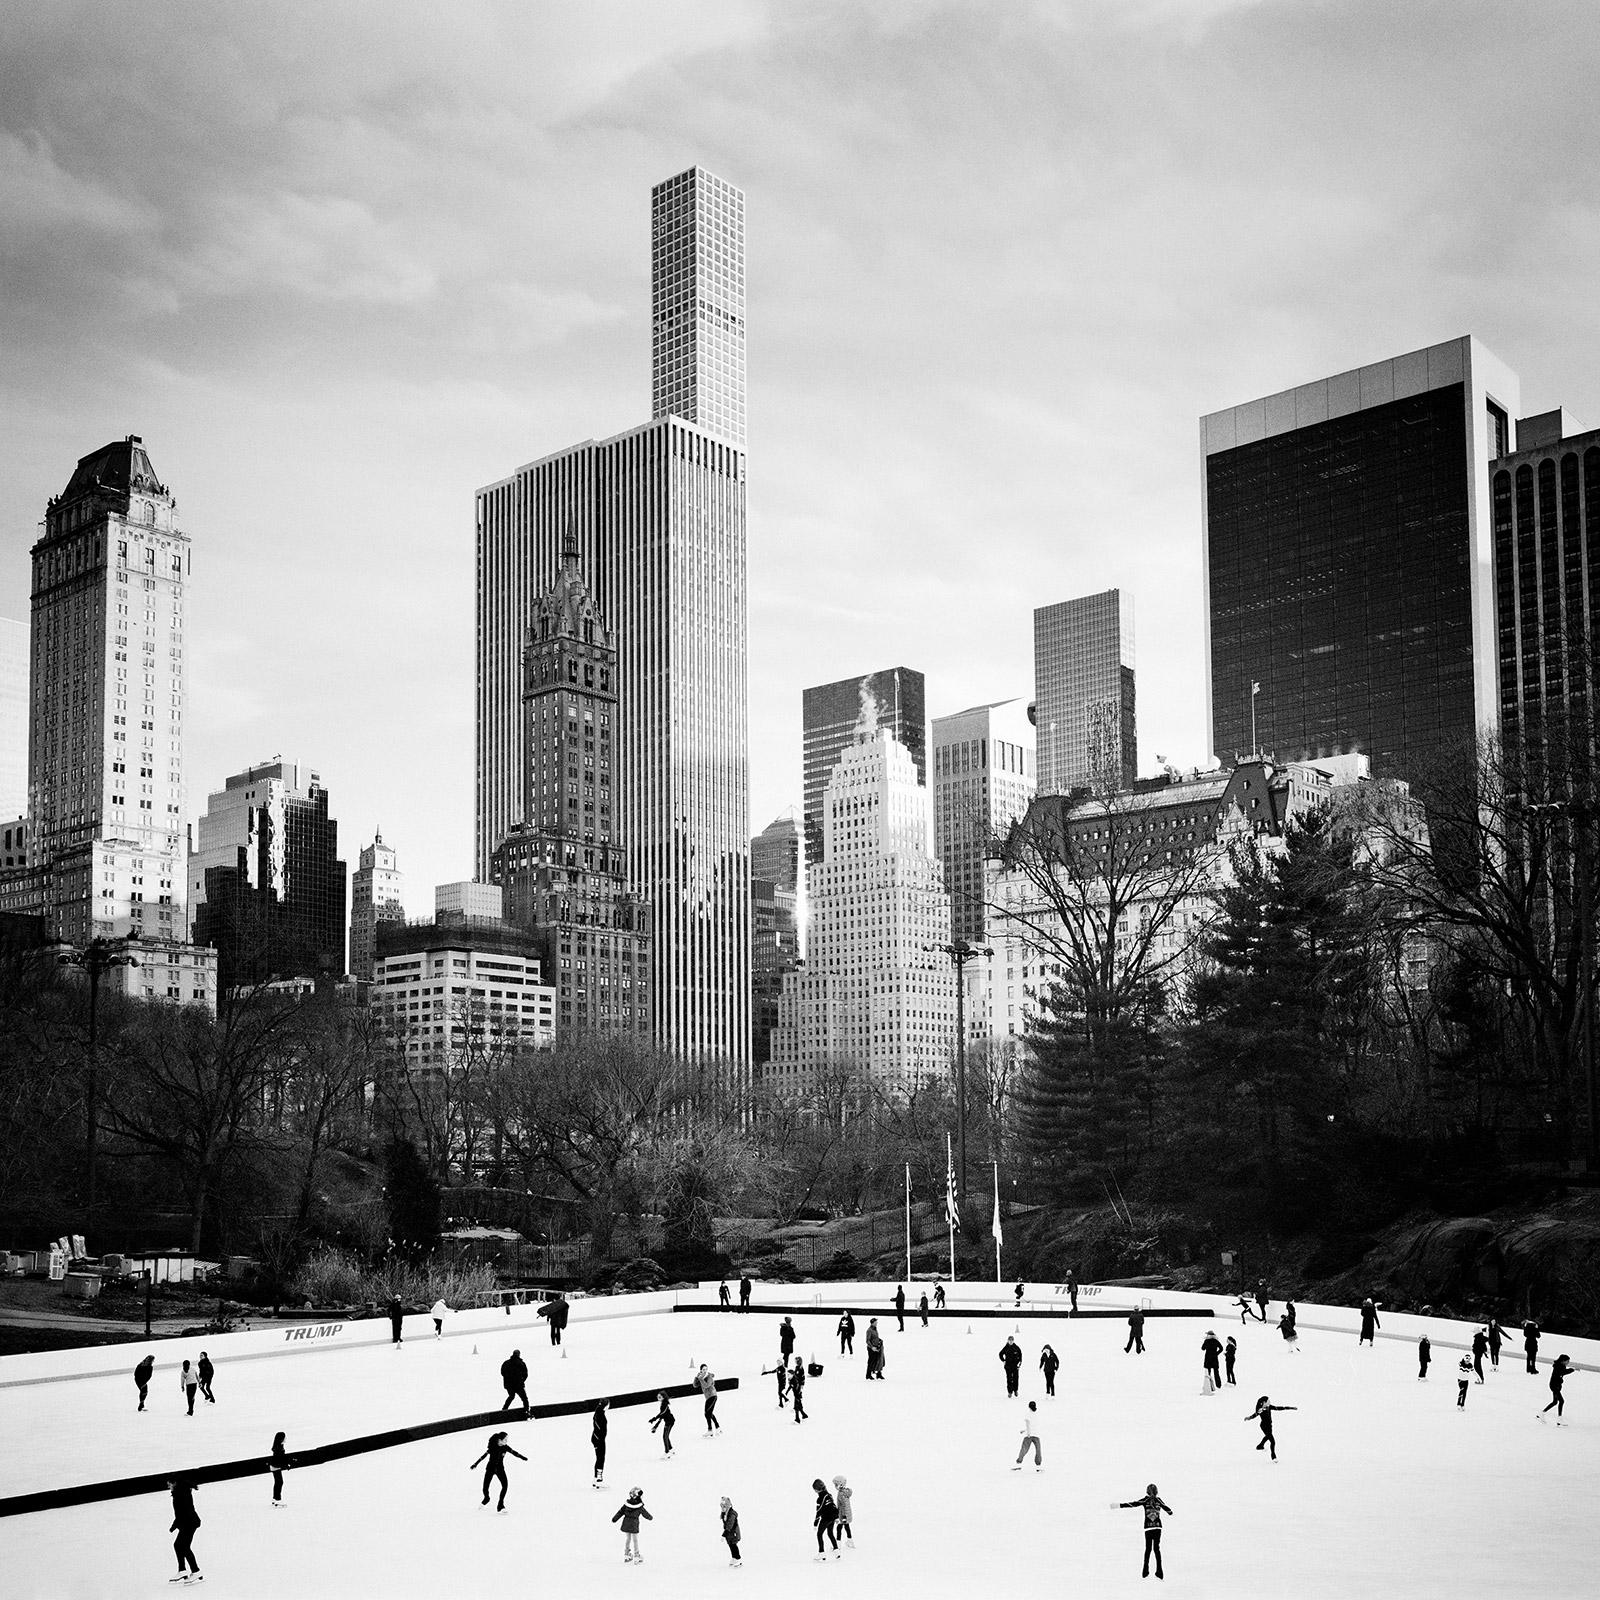 Gerald Berghammer Black and White Photograph - Dancing on Ice, skyscraper, New York, USA, black and white photography landscape